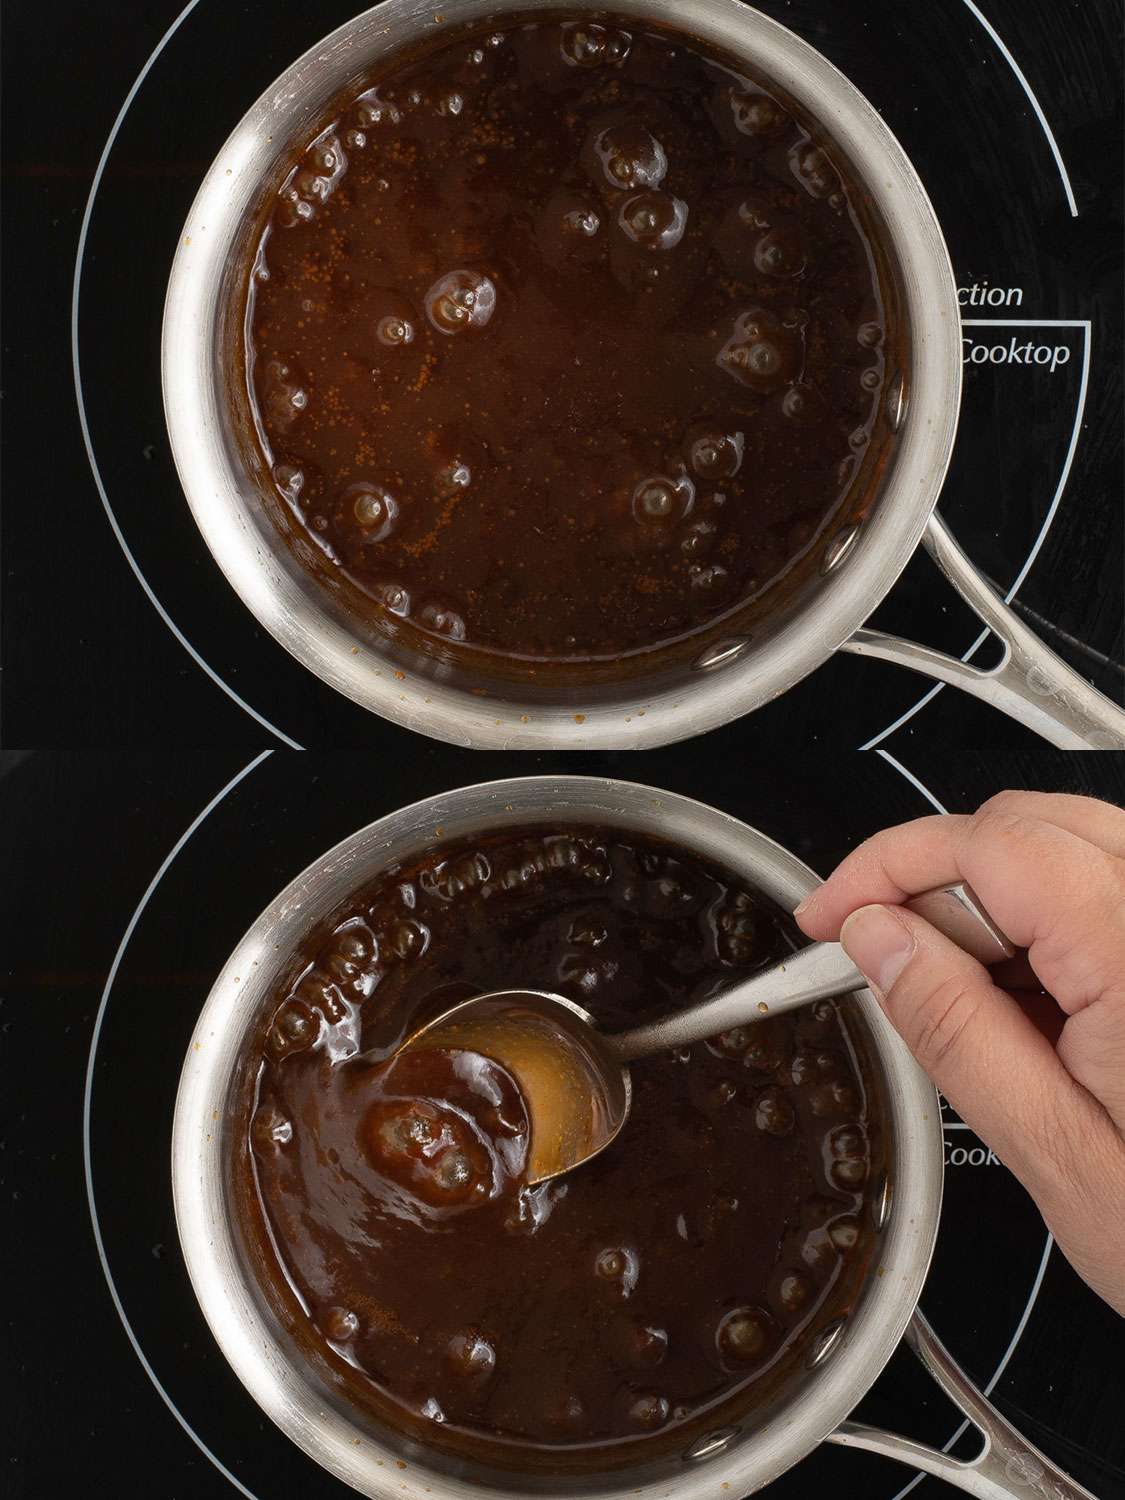 A two-image collage. The top image shows the hoisin sauce being cooked in a stainless steel saucepan. The bottom image shows the sauce being stirred with a metal spoon, to show off the correct glossy texture.